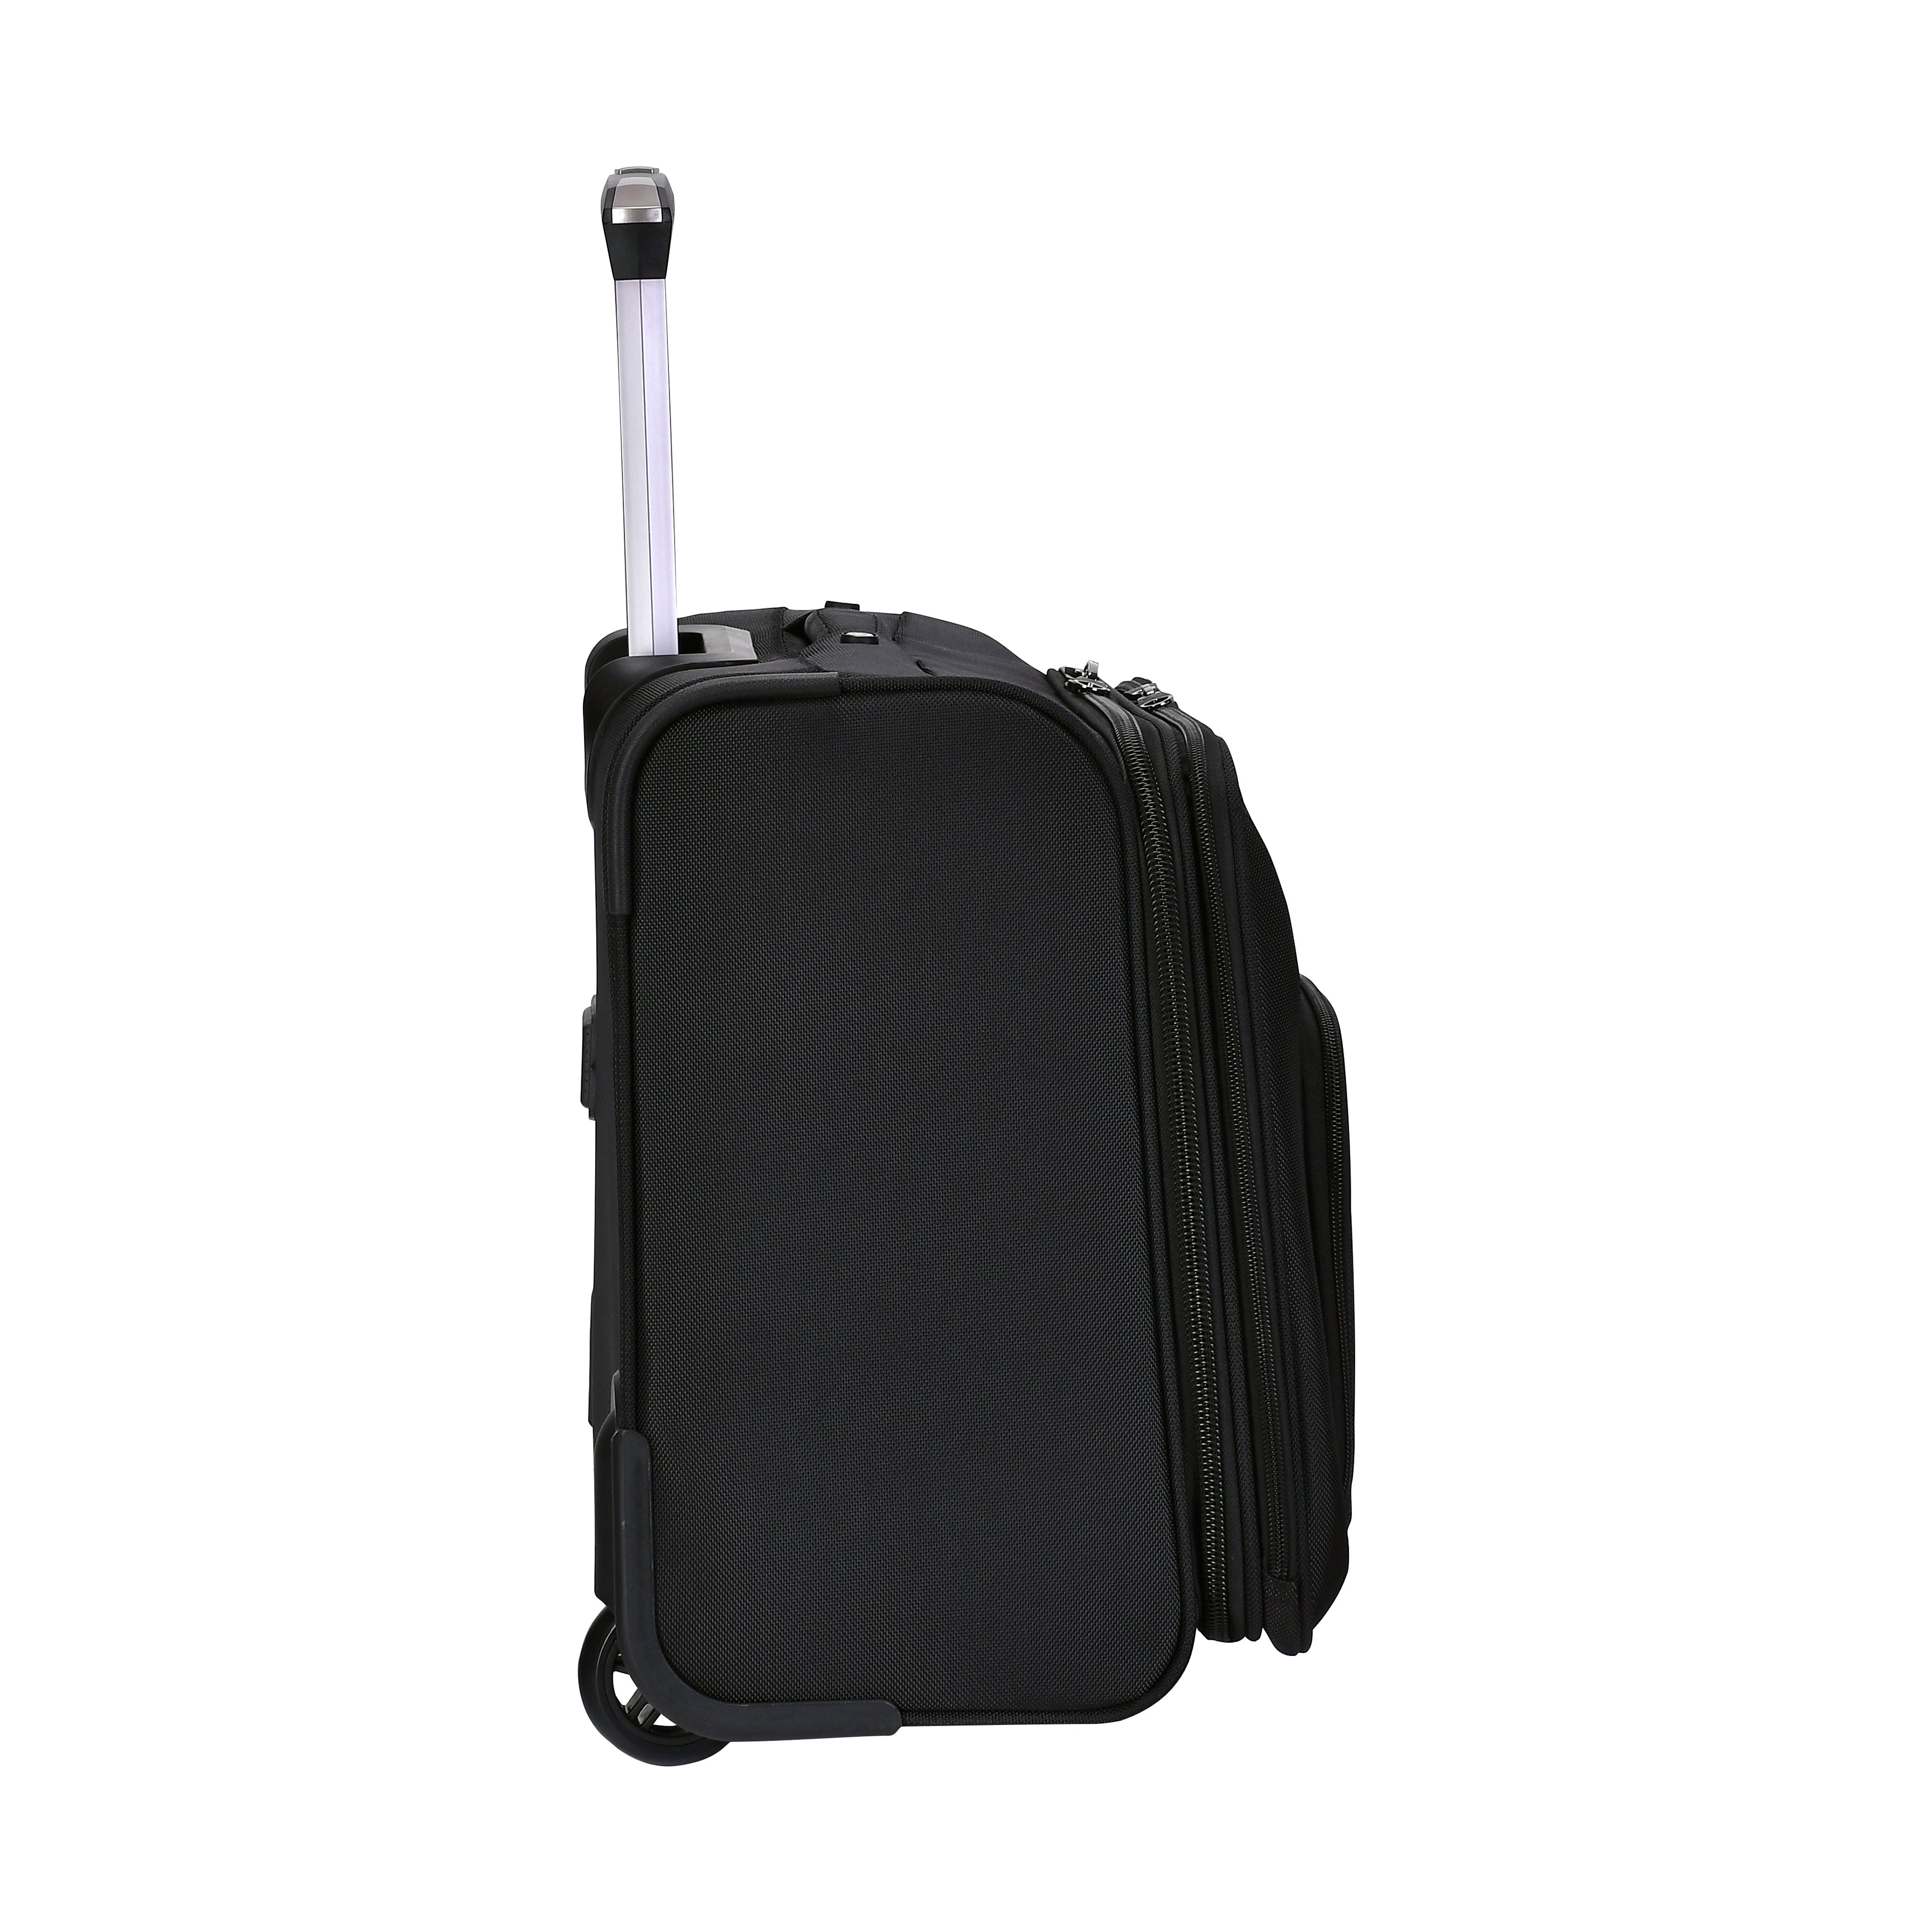 Eminent Water Repellant Multi Compartment Unisex Pilot case Trolley for Business Travel and Office, V135-17